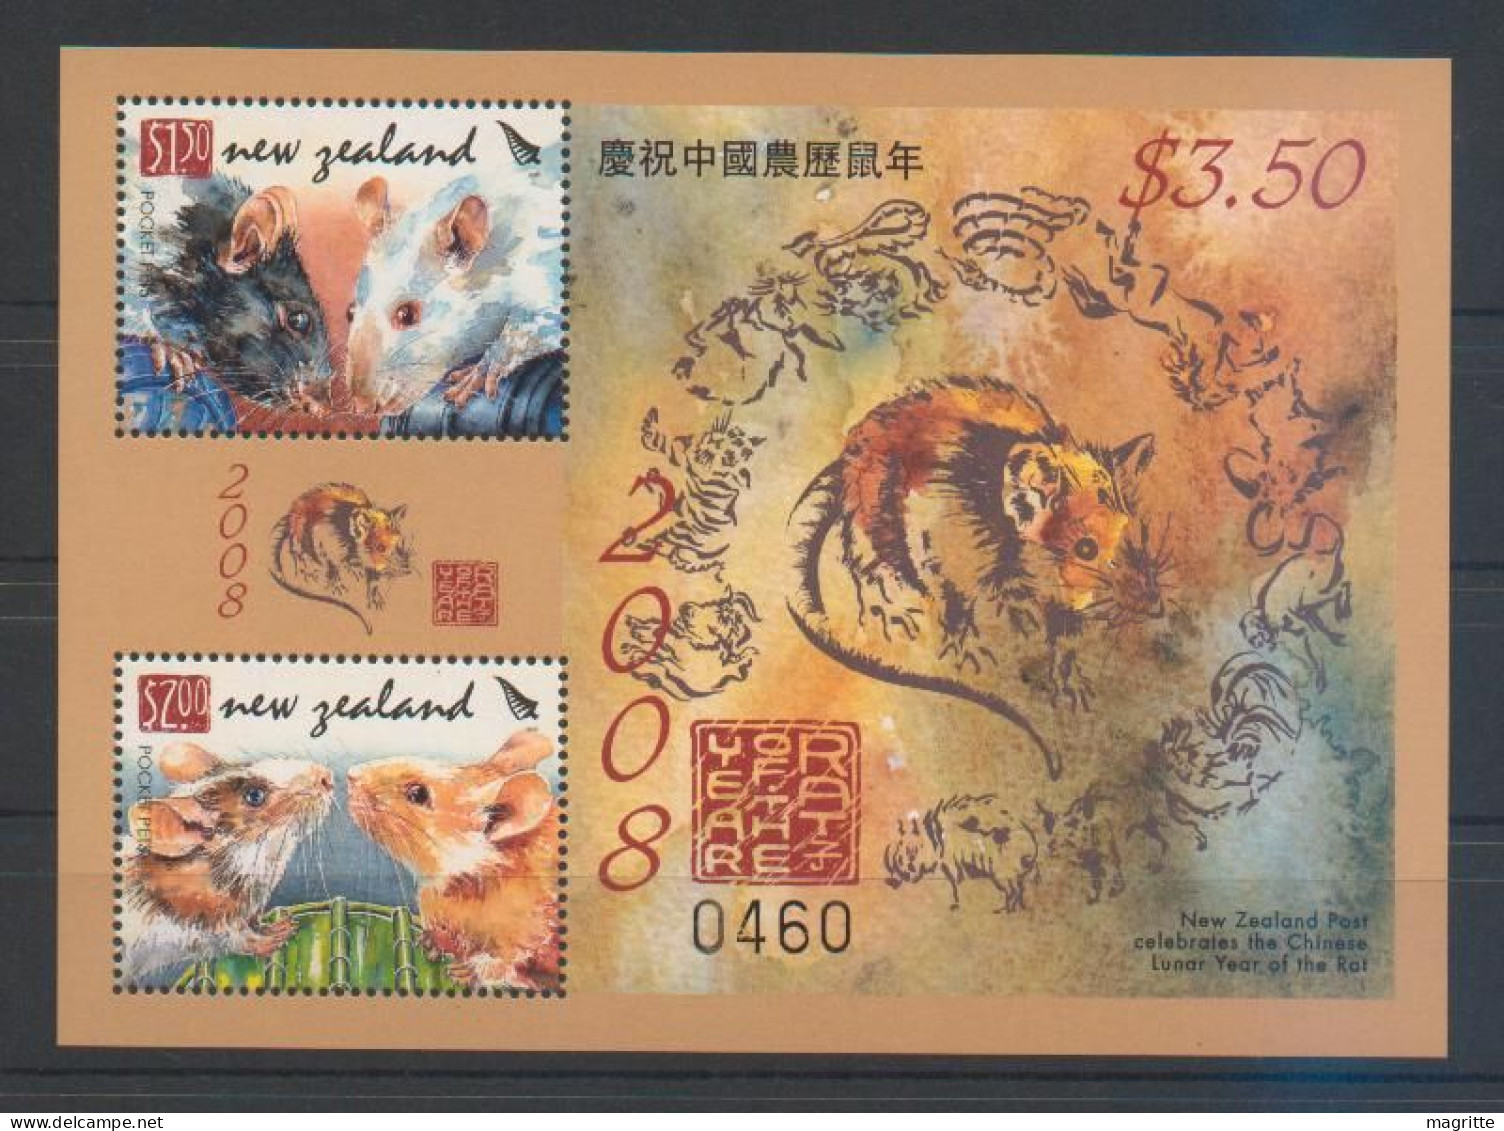 Nouvelle Zélande Pack Nouvel An Chinois , 12 Blocs Numérotés - New Zealand Chinese Lunar Series Limited Edition 12 S/S - Anno Nuovo Cinese